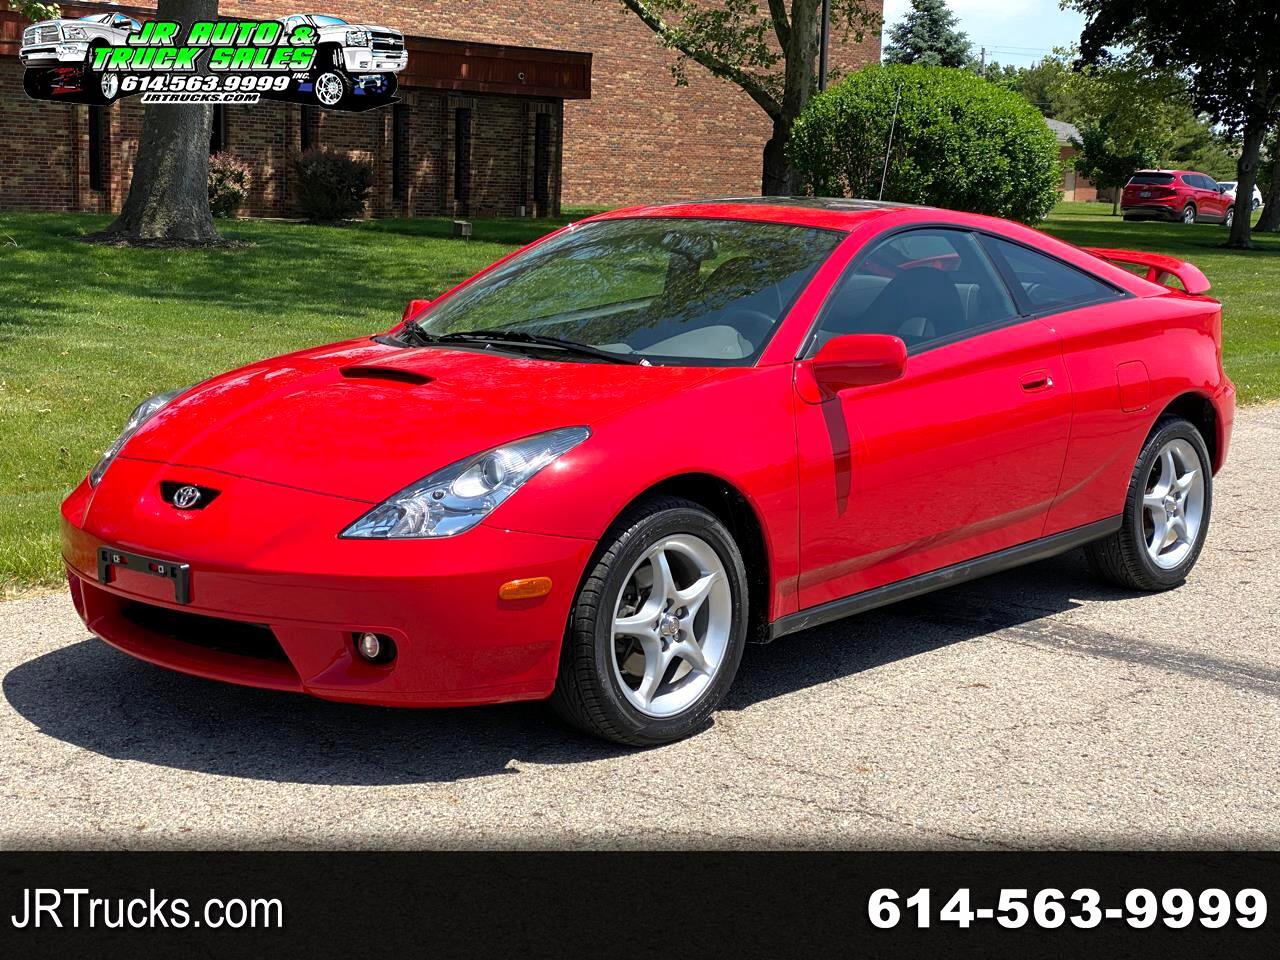 Used Toyota Celica for Sale Right Now - Autotrader